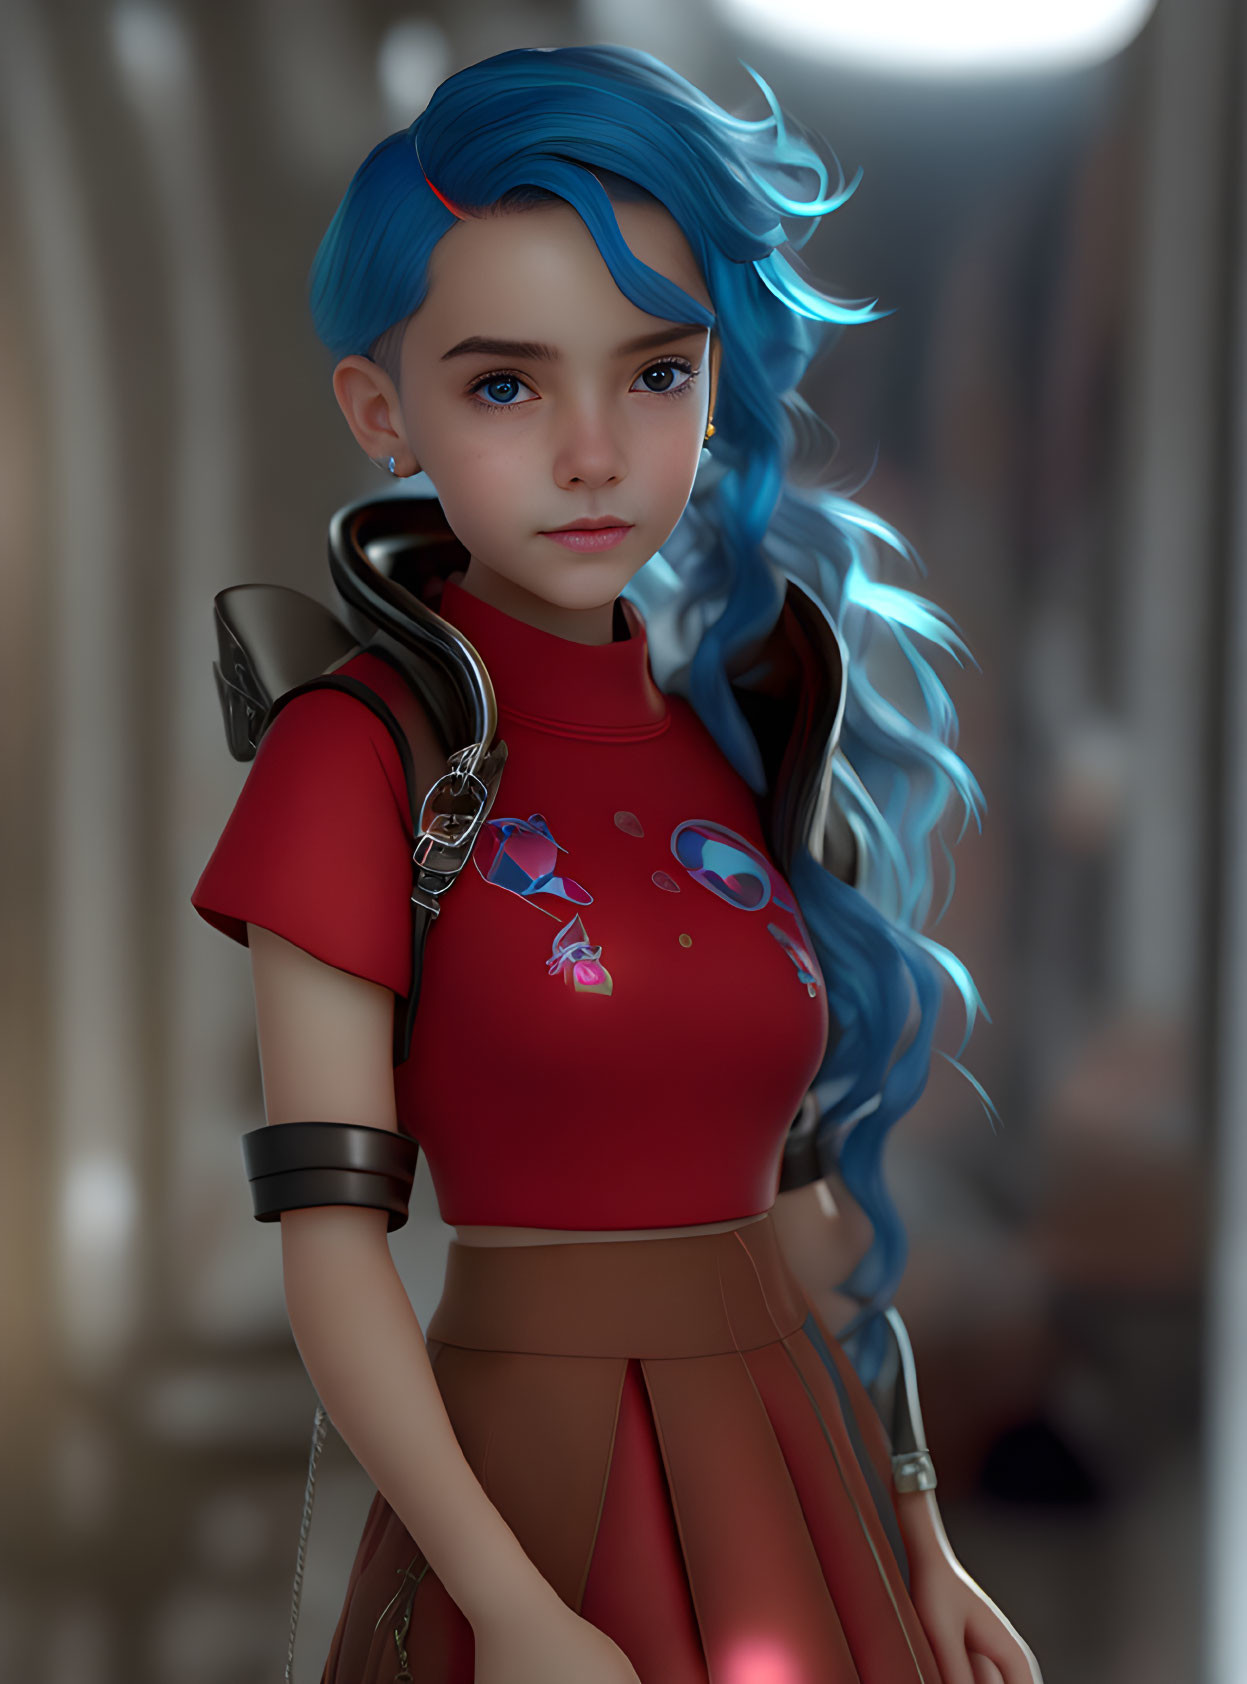 Digital art portrait of young female character with blue hair and futuristic shoulder armor in red t-shirt.